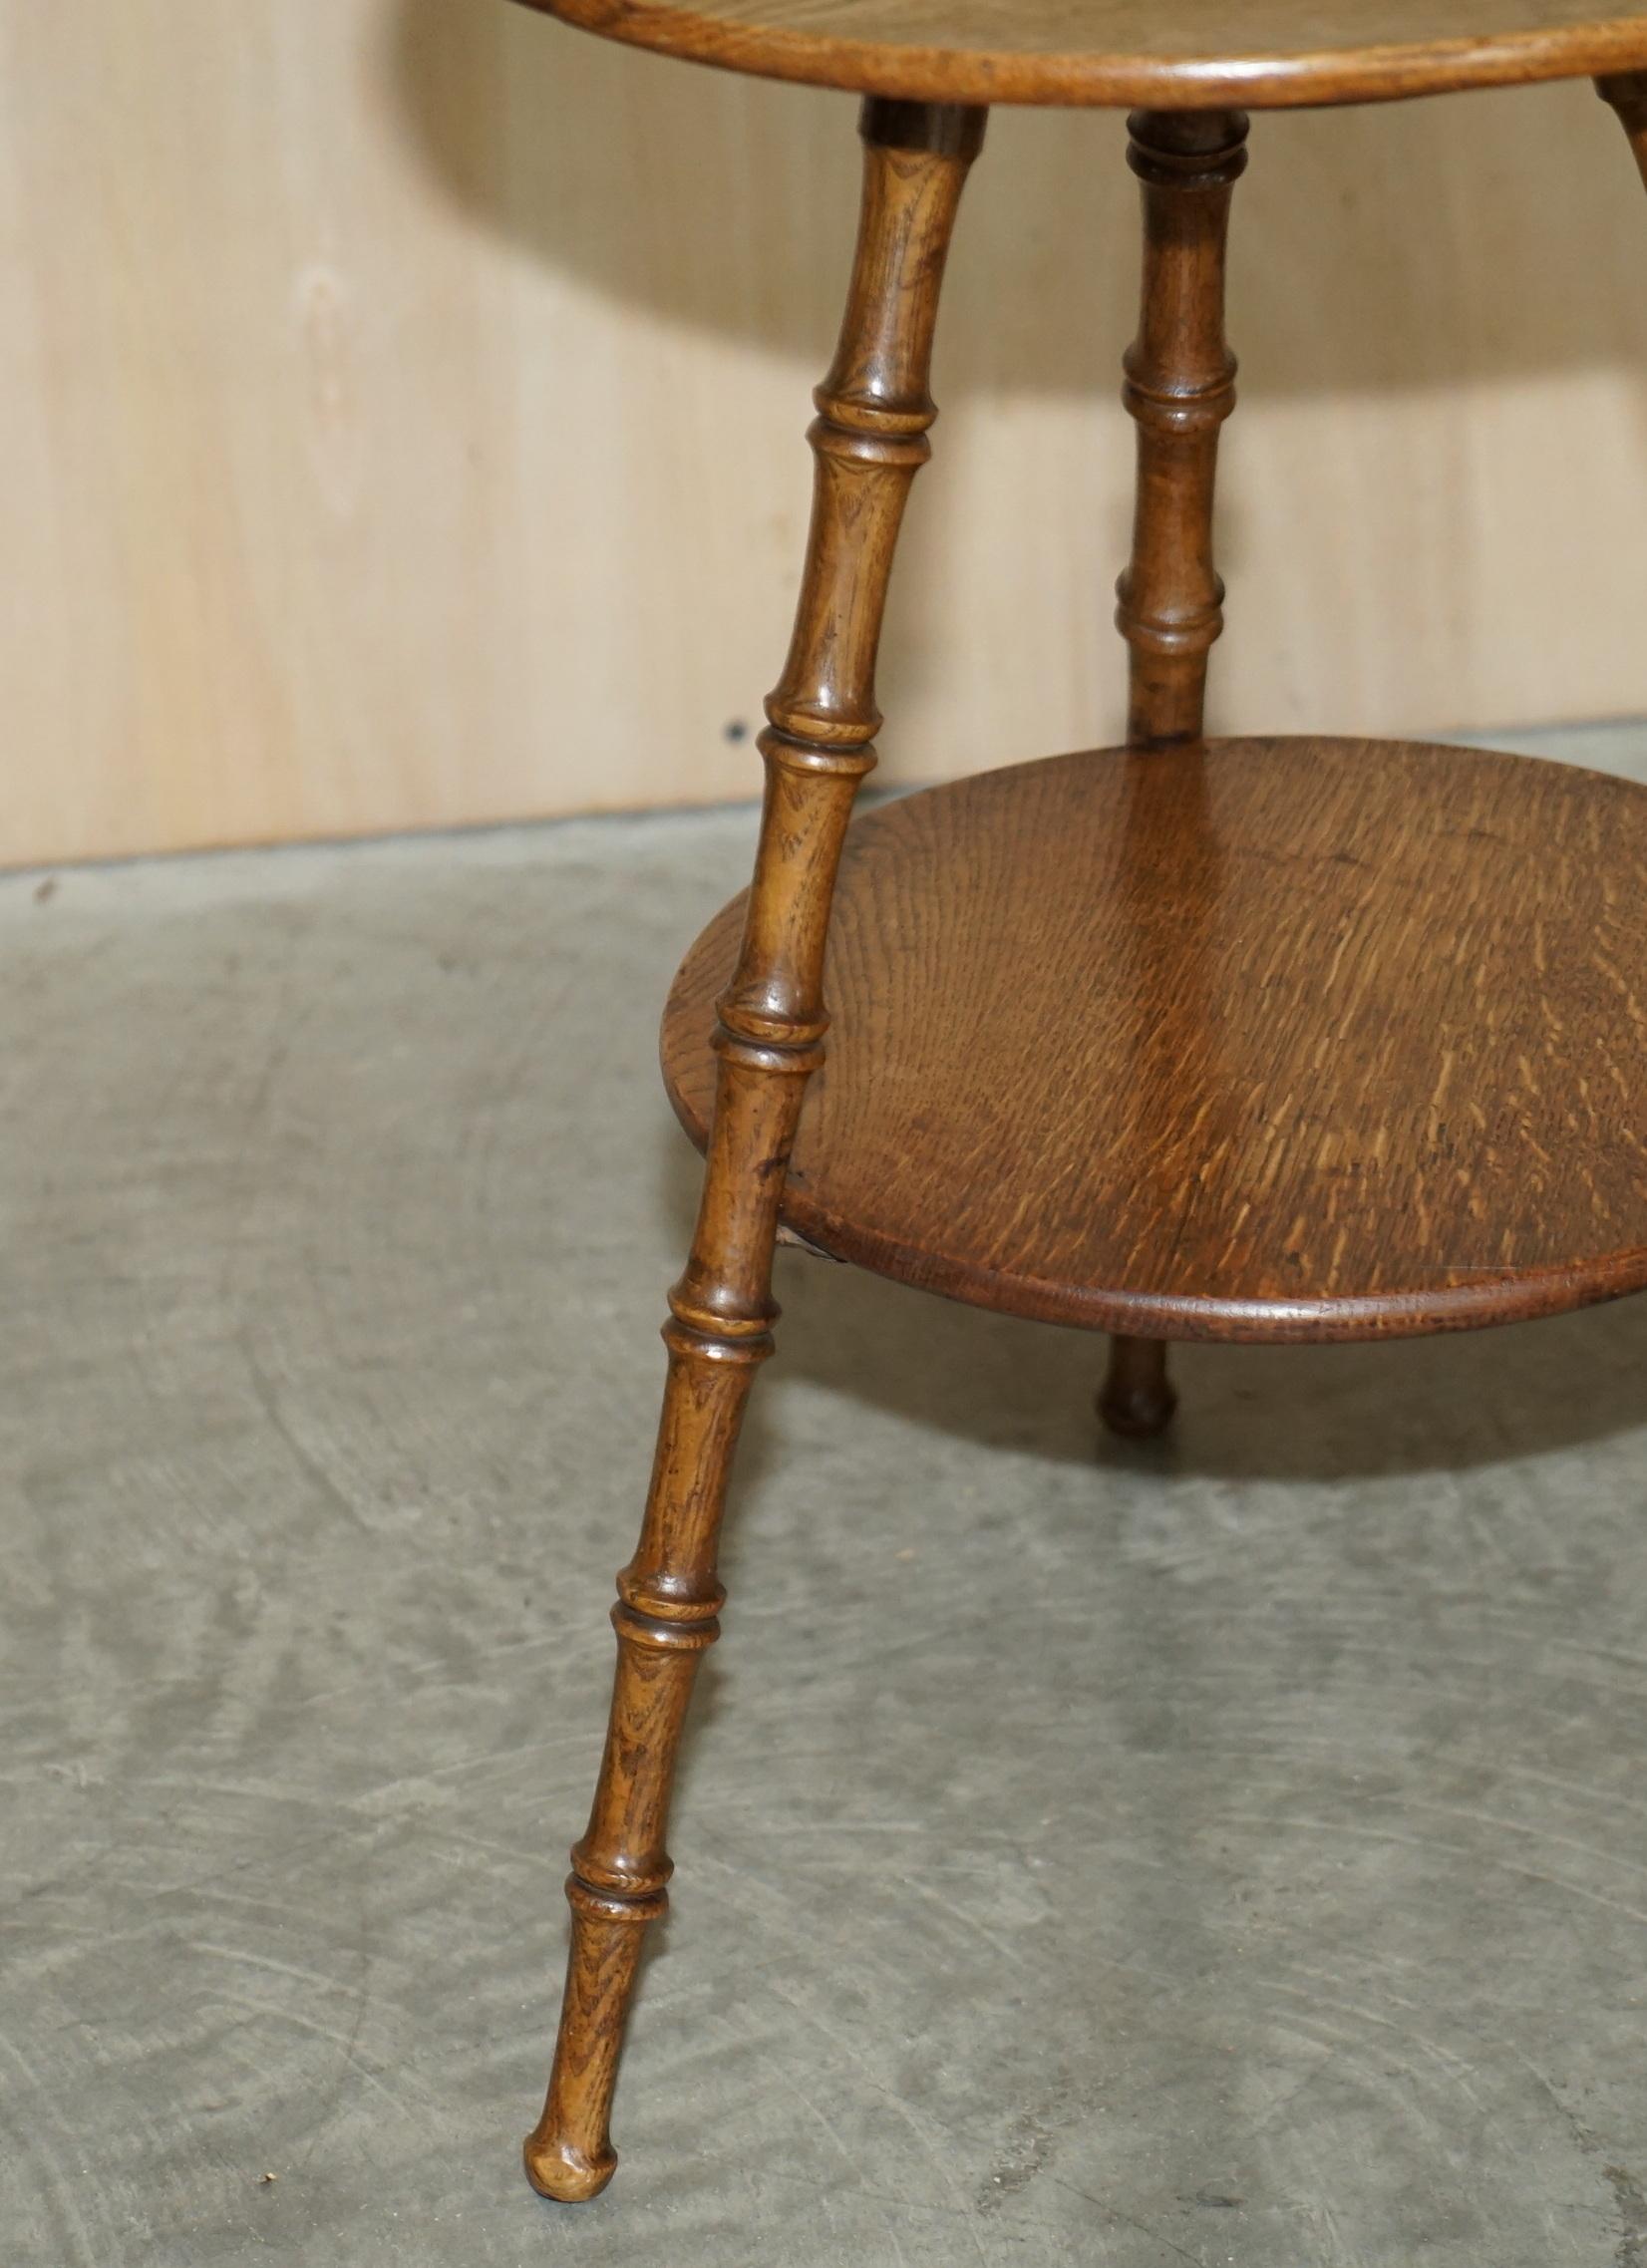 We are delighted to offer for sale this lovely hand made in England circa 1900 English oak side table with famboo carved legs

A good looking, well made and decorative piece, these tables are super decorative and very popular. This one has famboo